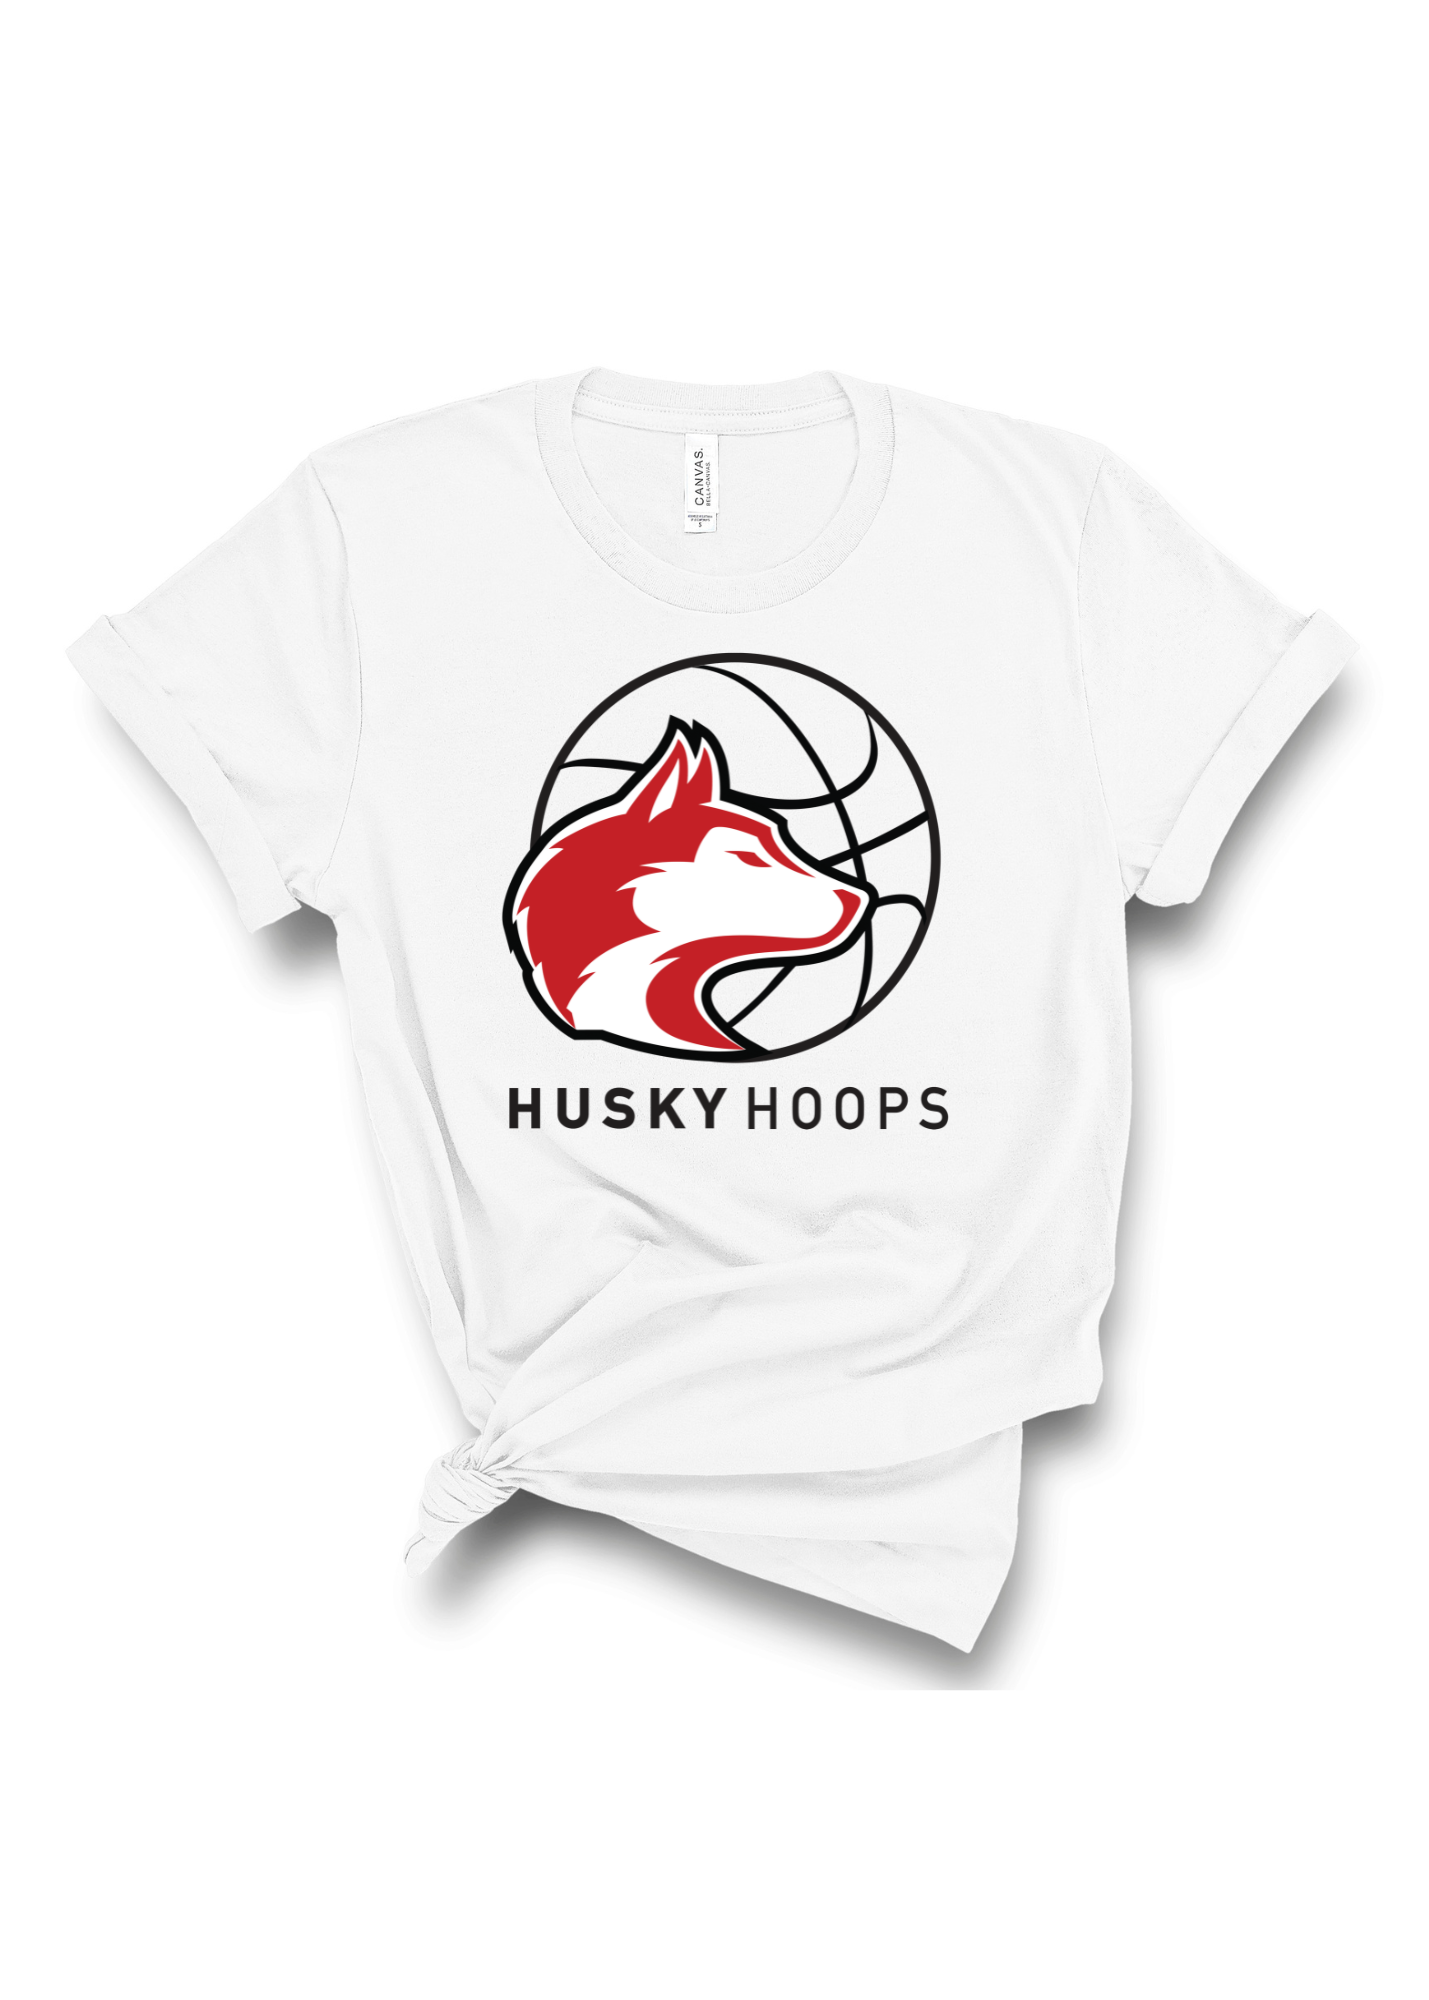 Husky Hoops | Tee | Adult-Sister Shirts-Sister Shirts, Cute & Custom Tees for Mama & Littles in Trussville, Alabama.